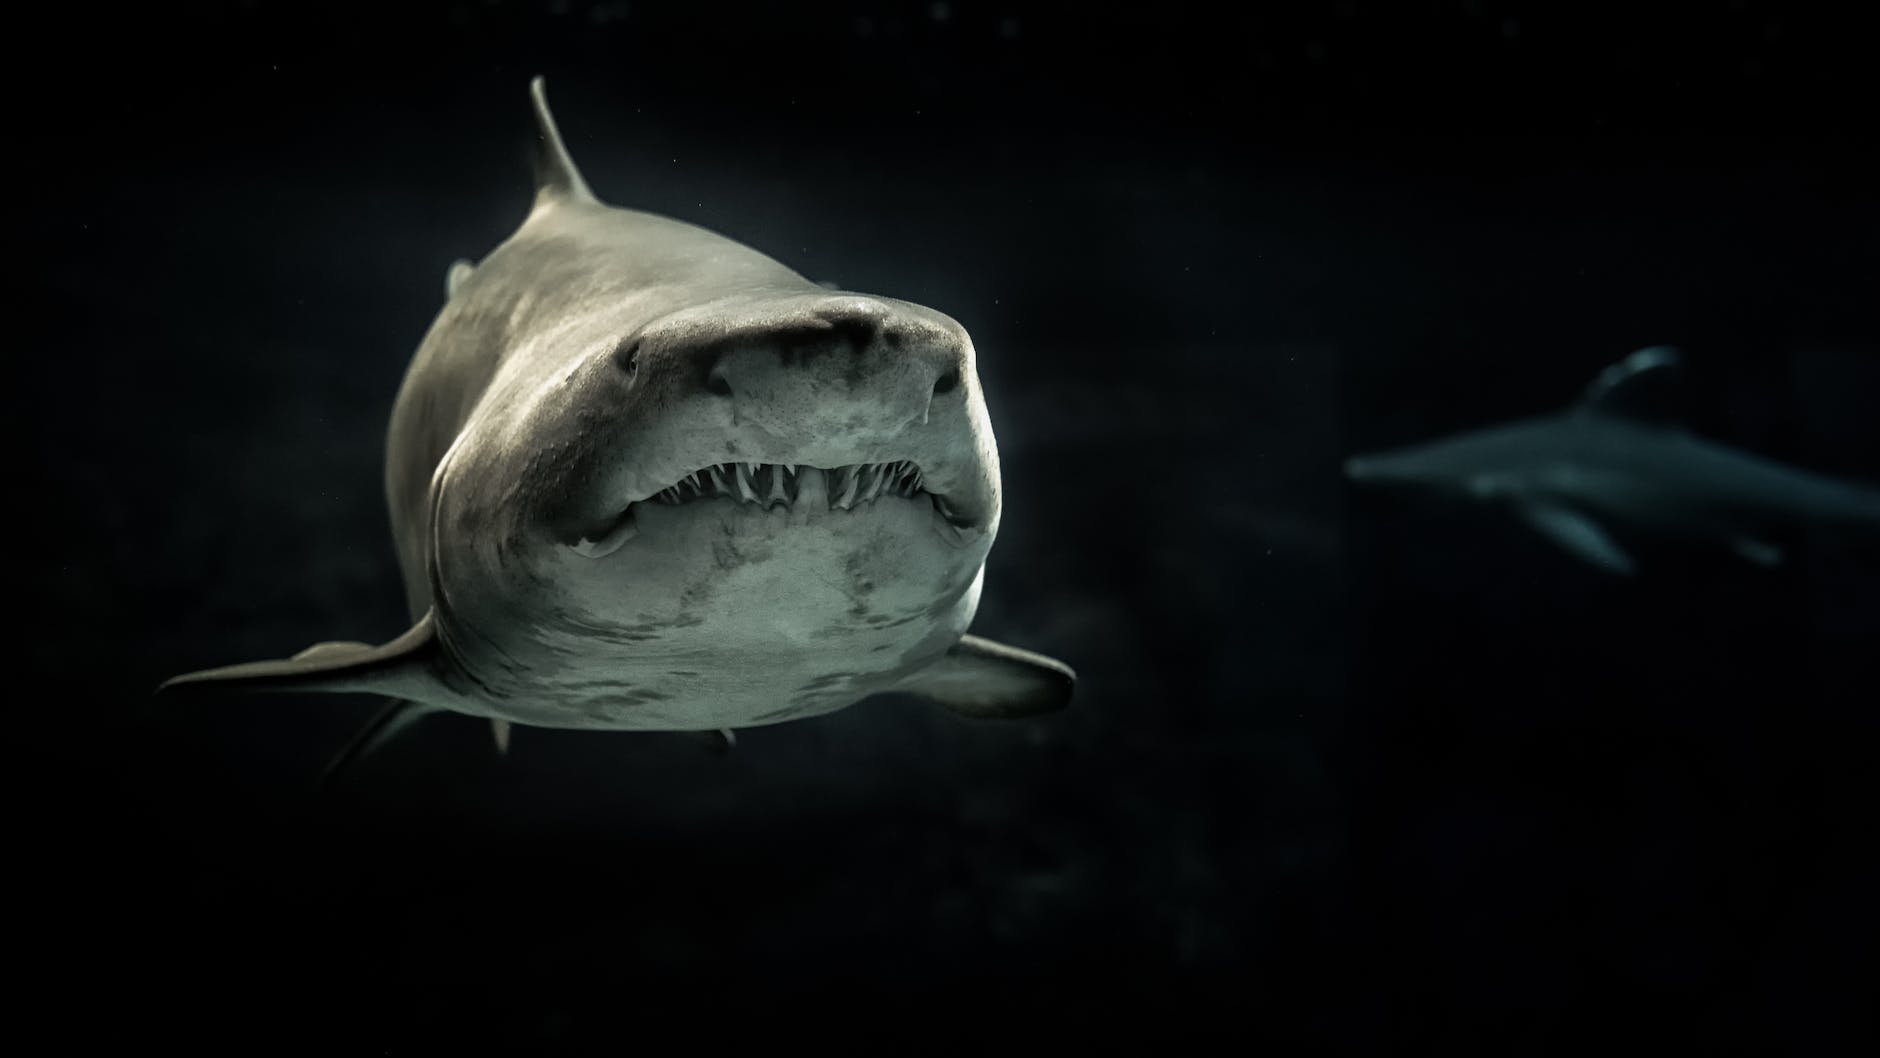 A close up of a shark swimming straight towards the camera. You can see the teeth! The shark is lid by camera light the water around is literally black and the silhouette of another shark can just be made out in the background. Super scary picture. The shark has the head slightly tilted upwards as if sniffing the camera man. 